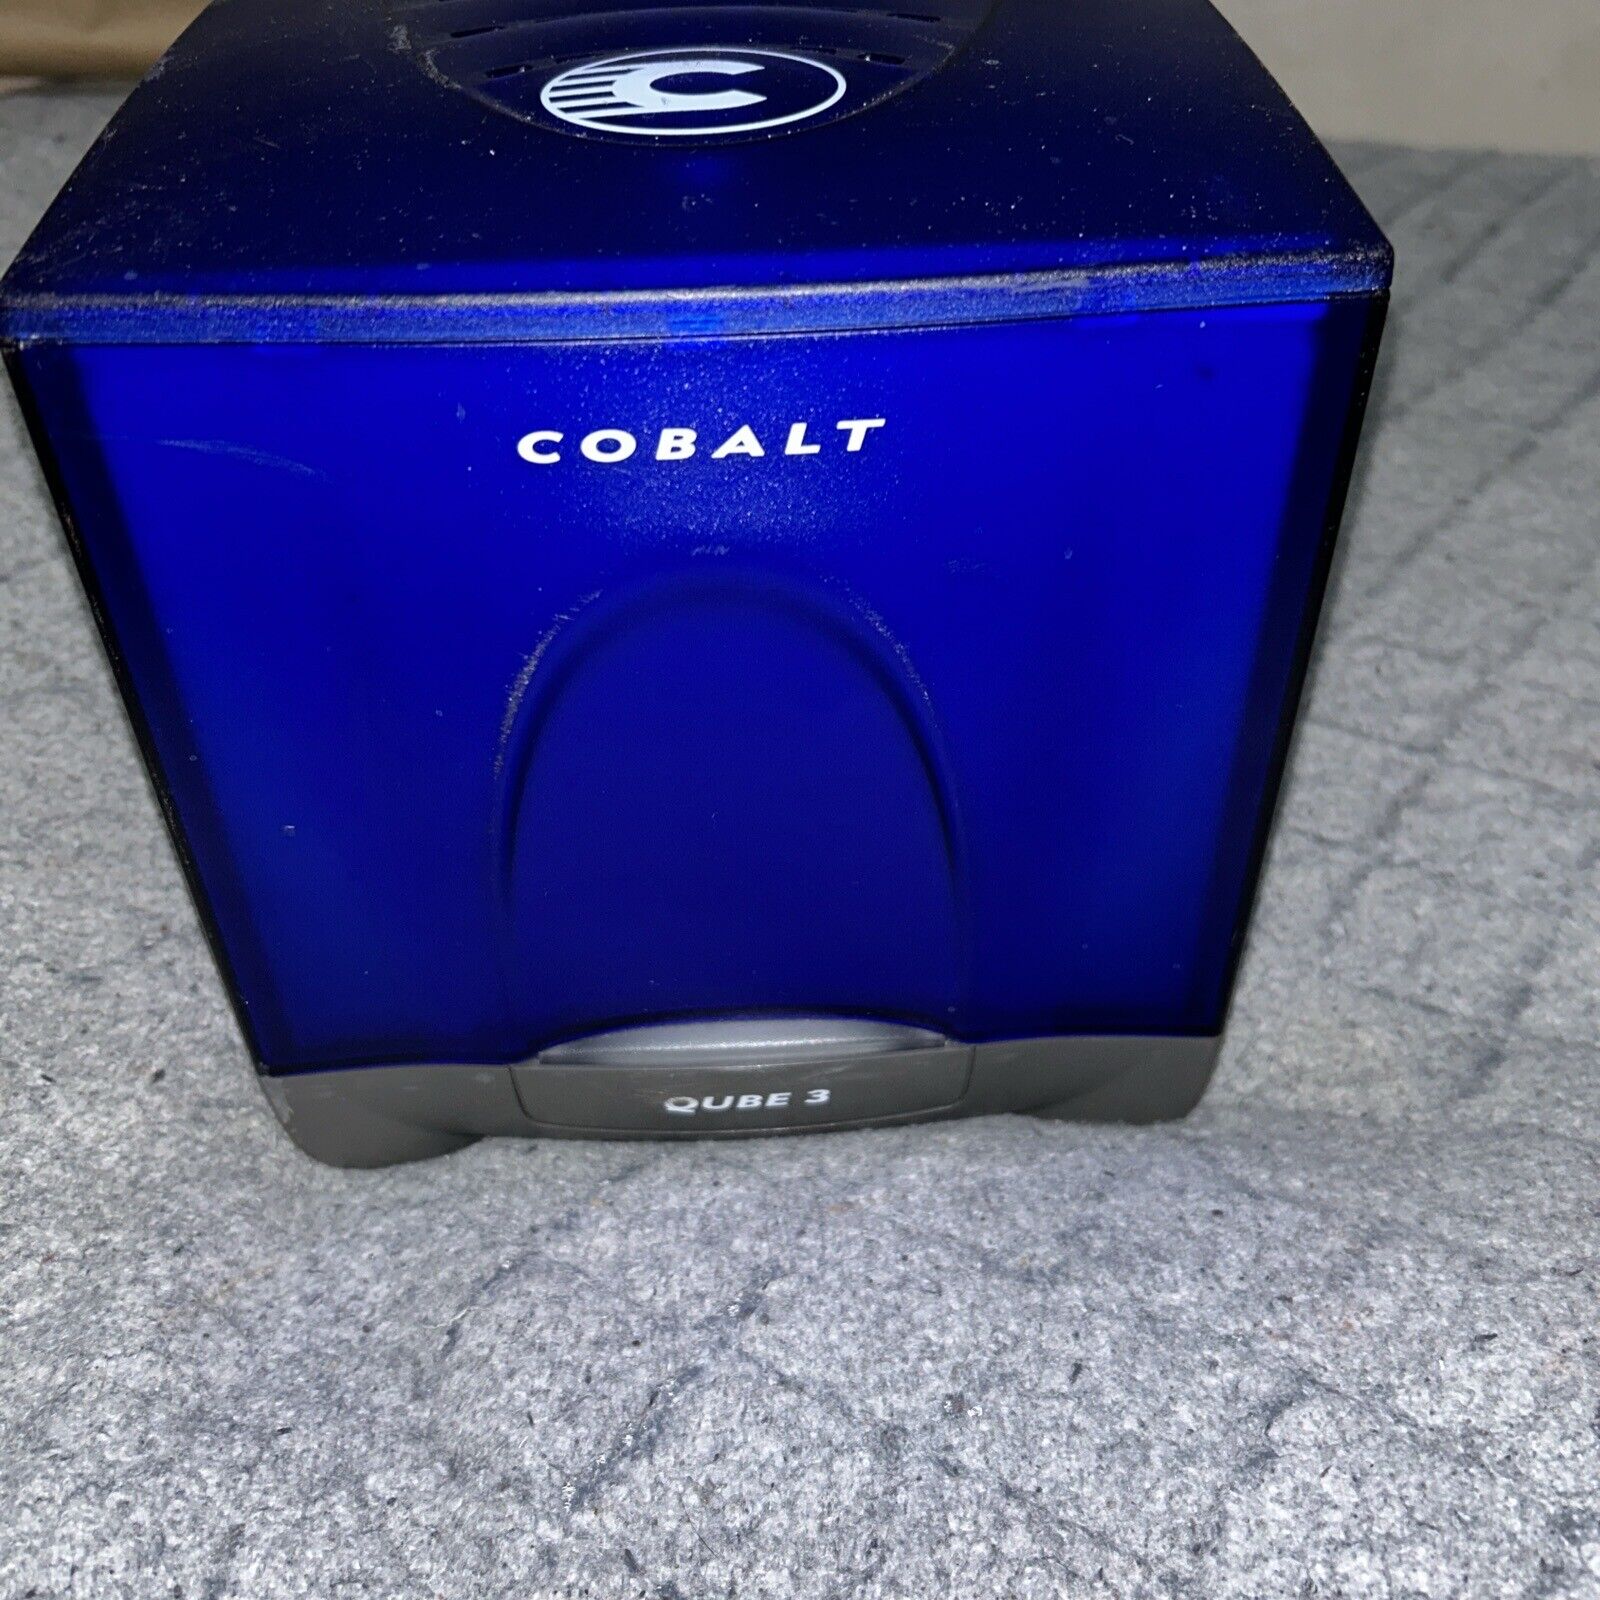 Cobalt Networks (Sun Microsystems) Qube 3 Computer PC POWERS ON SOLD AS IS *READ